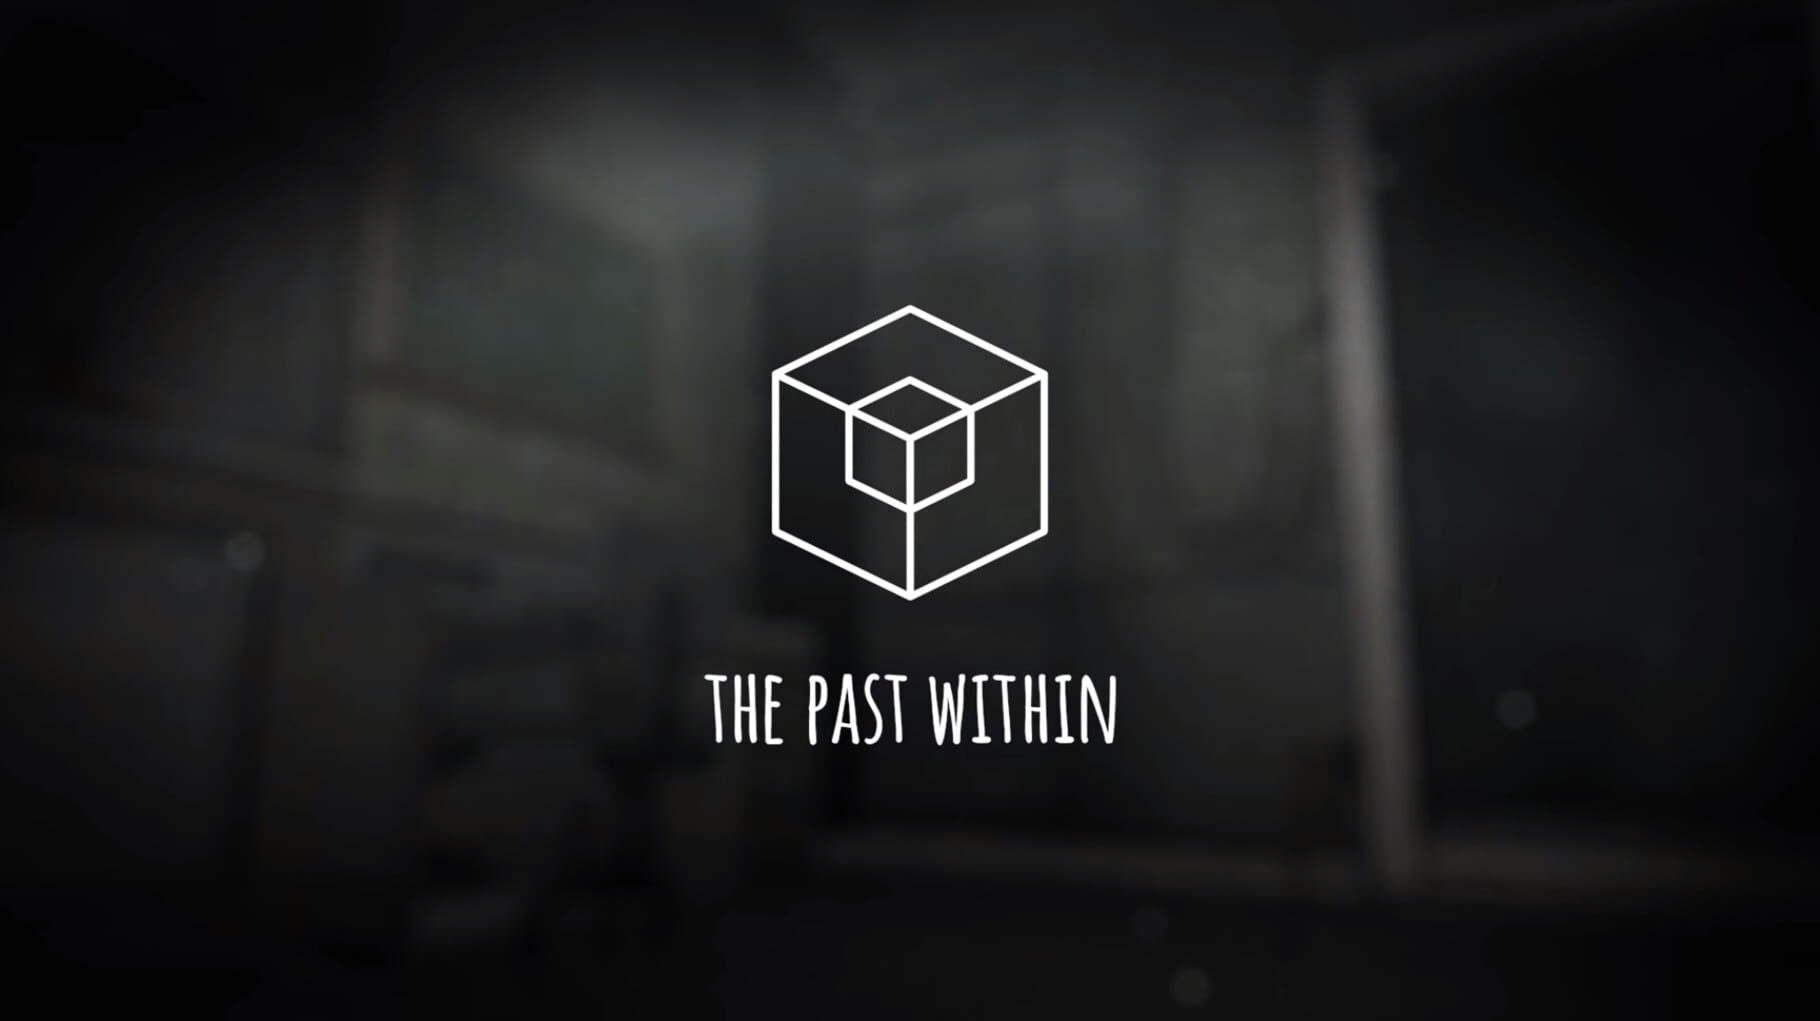 The Past Within artwork